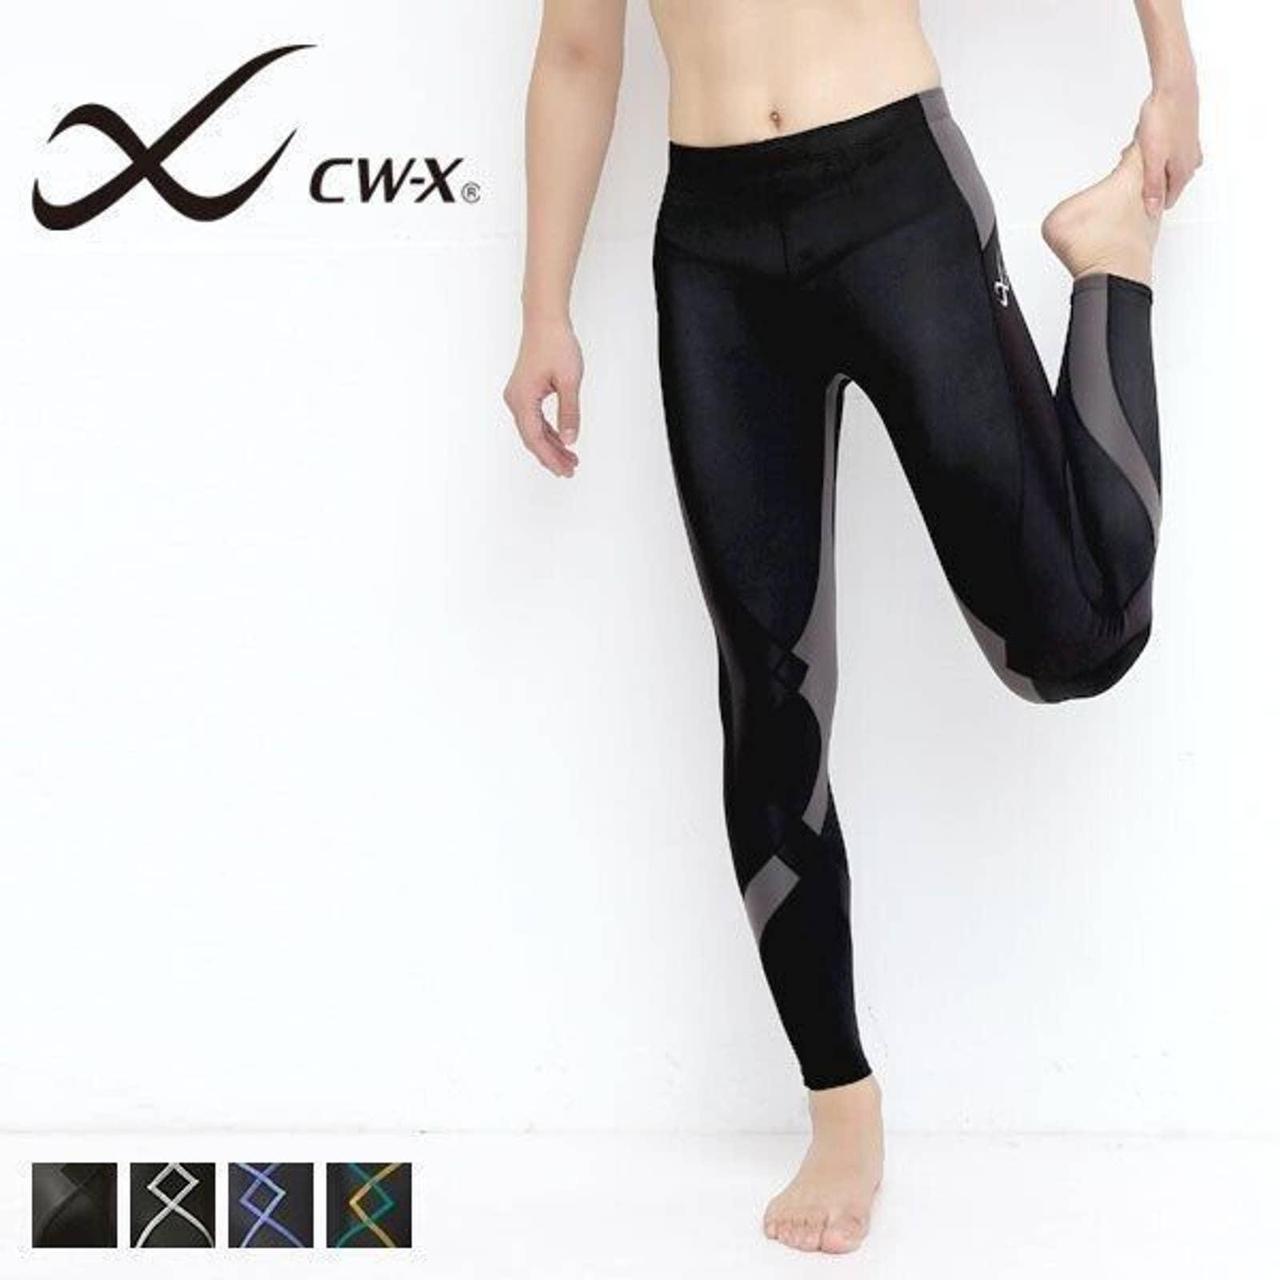 CW-X Women's Stabilyx Support Athetic Tights Small - Depop